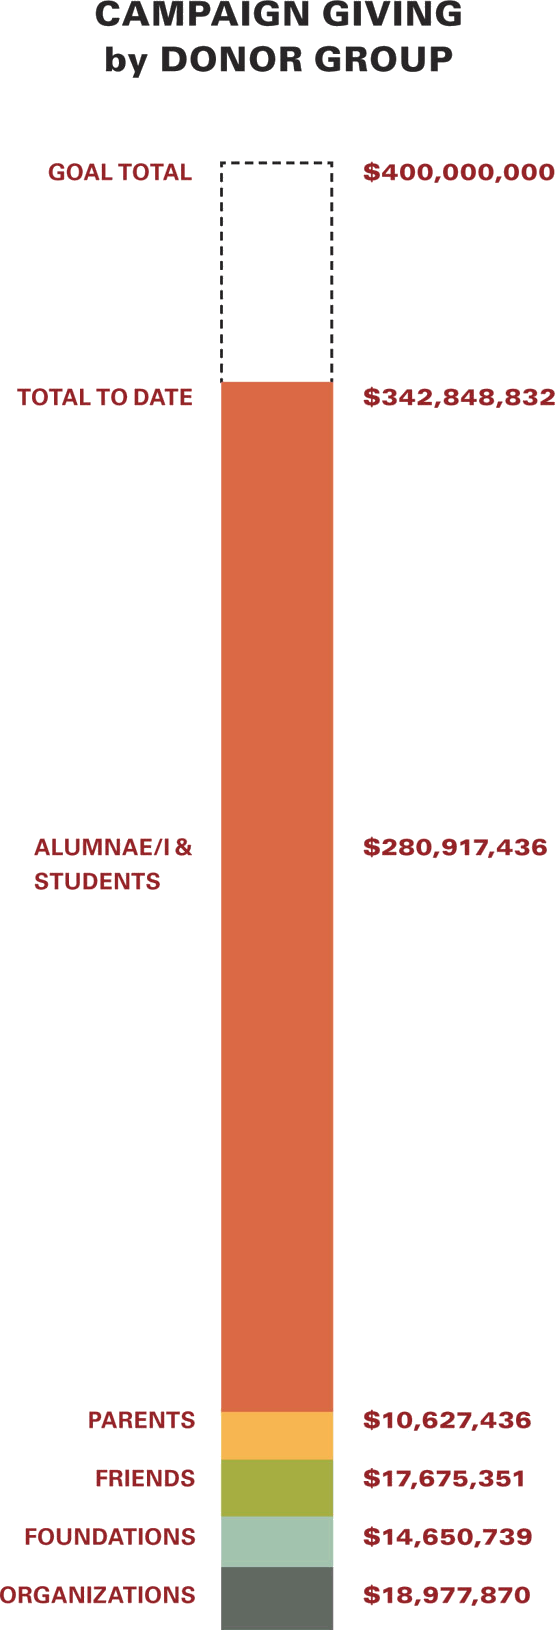 Campaign giving by donor group: - Organizations ($18,977,870) - Foundations ($14,650739) - Friends ($17,675,351) - Parents ($10627,436) - Alumnae/i and Students ($280,917,436) - Total to date ($342,848,832) - Goal Total ($400,000,000)